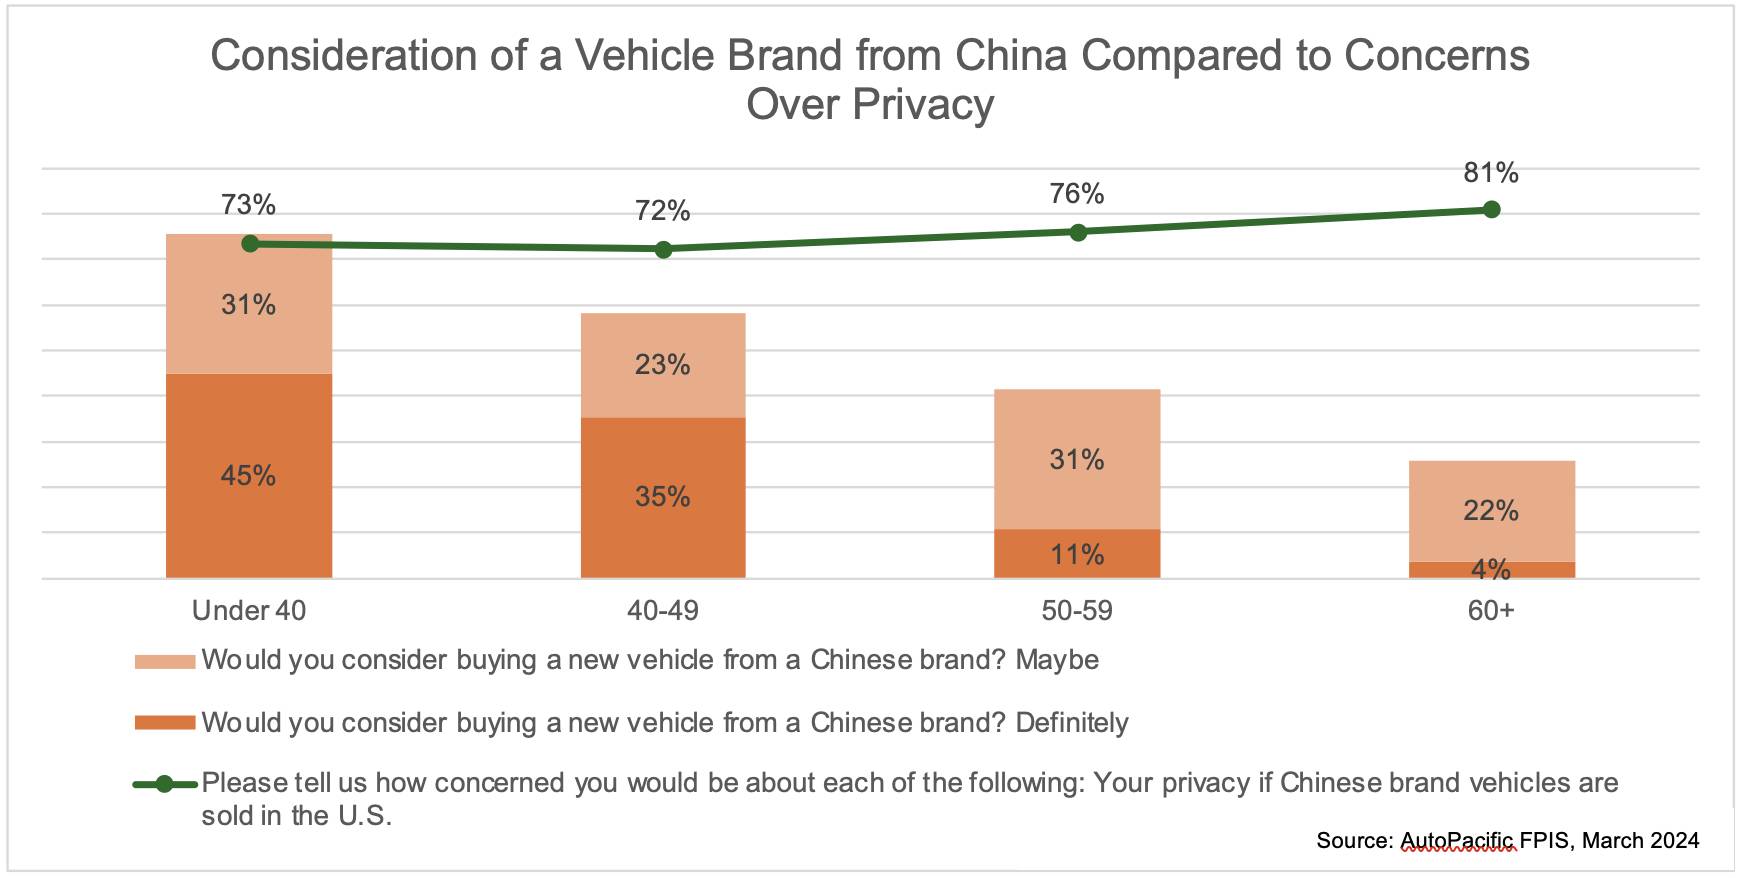 Consideration of vehicle brand from China compared to privacy concerns (from AutoPacific survey)